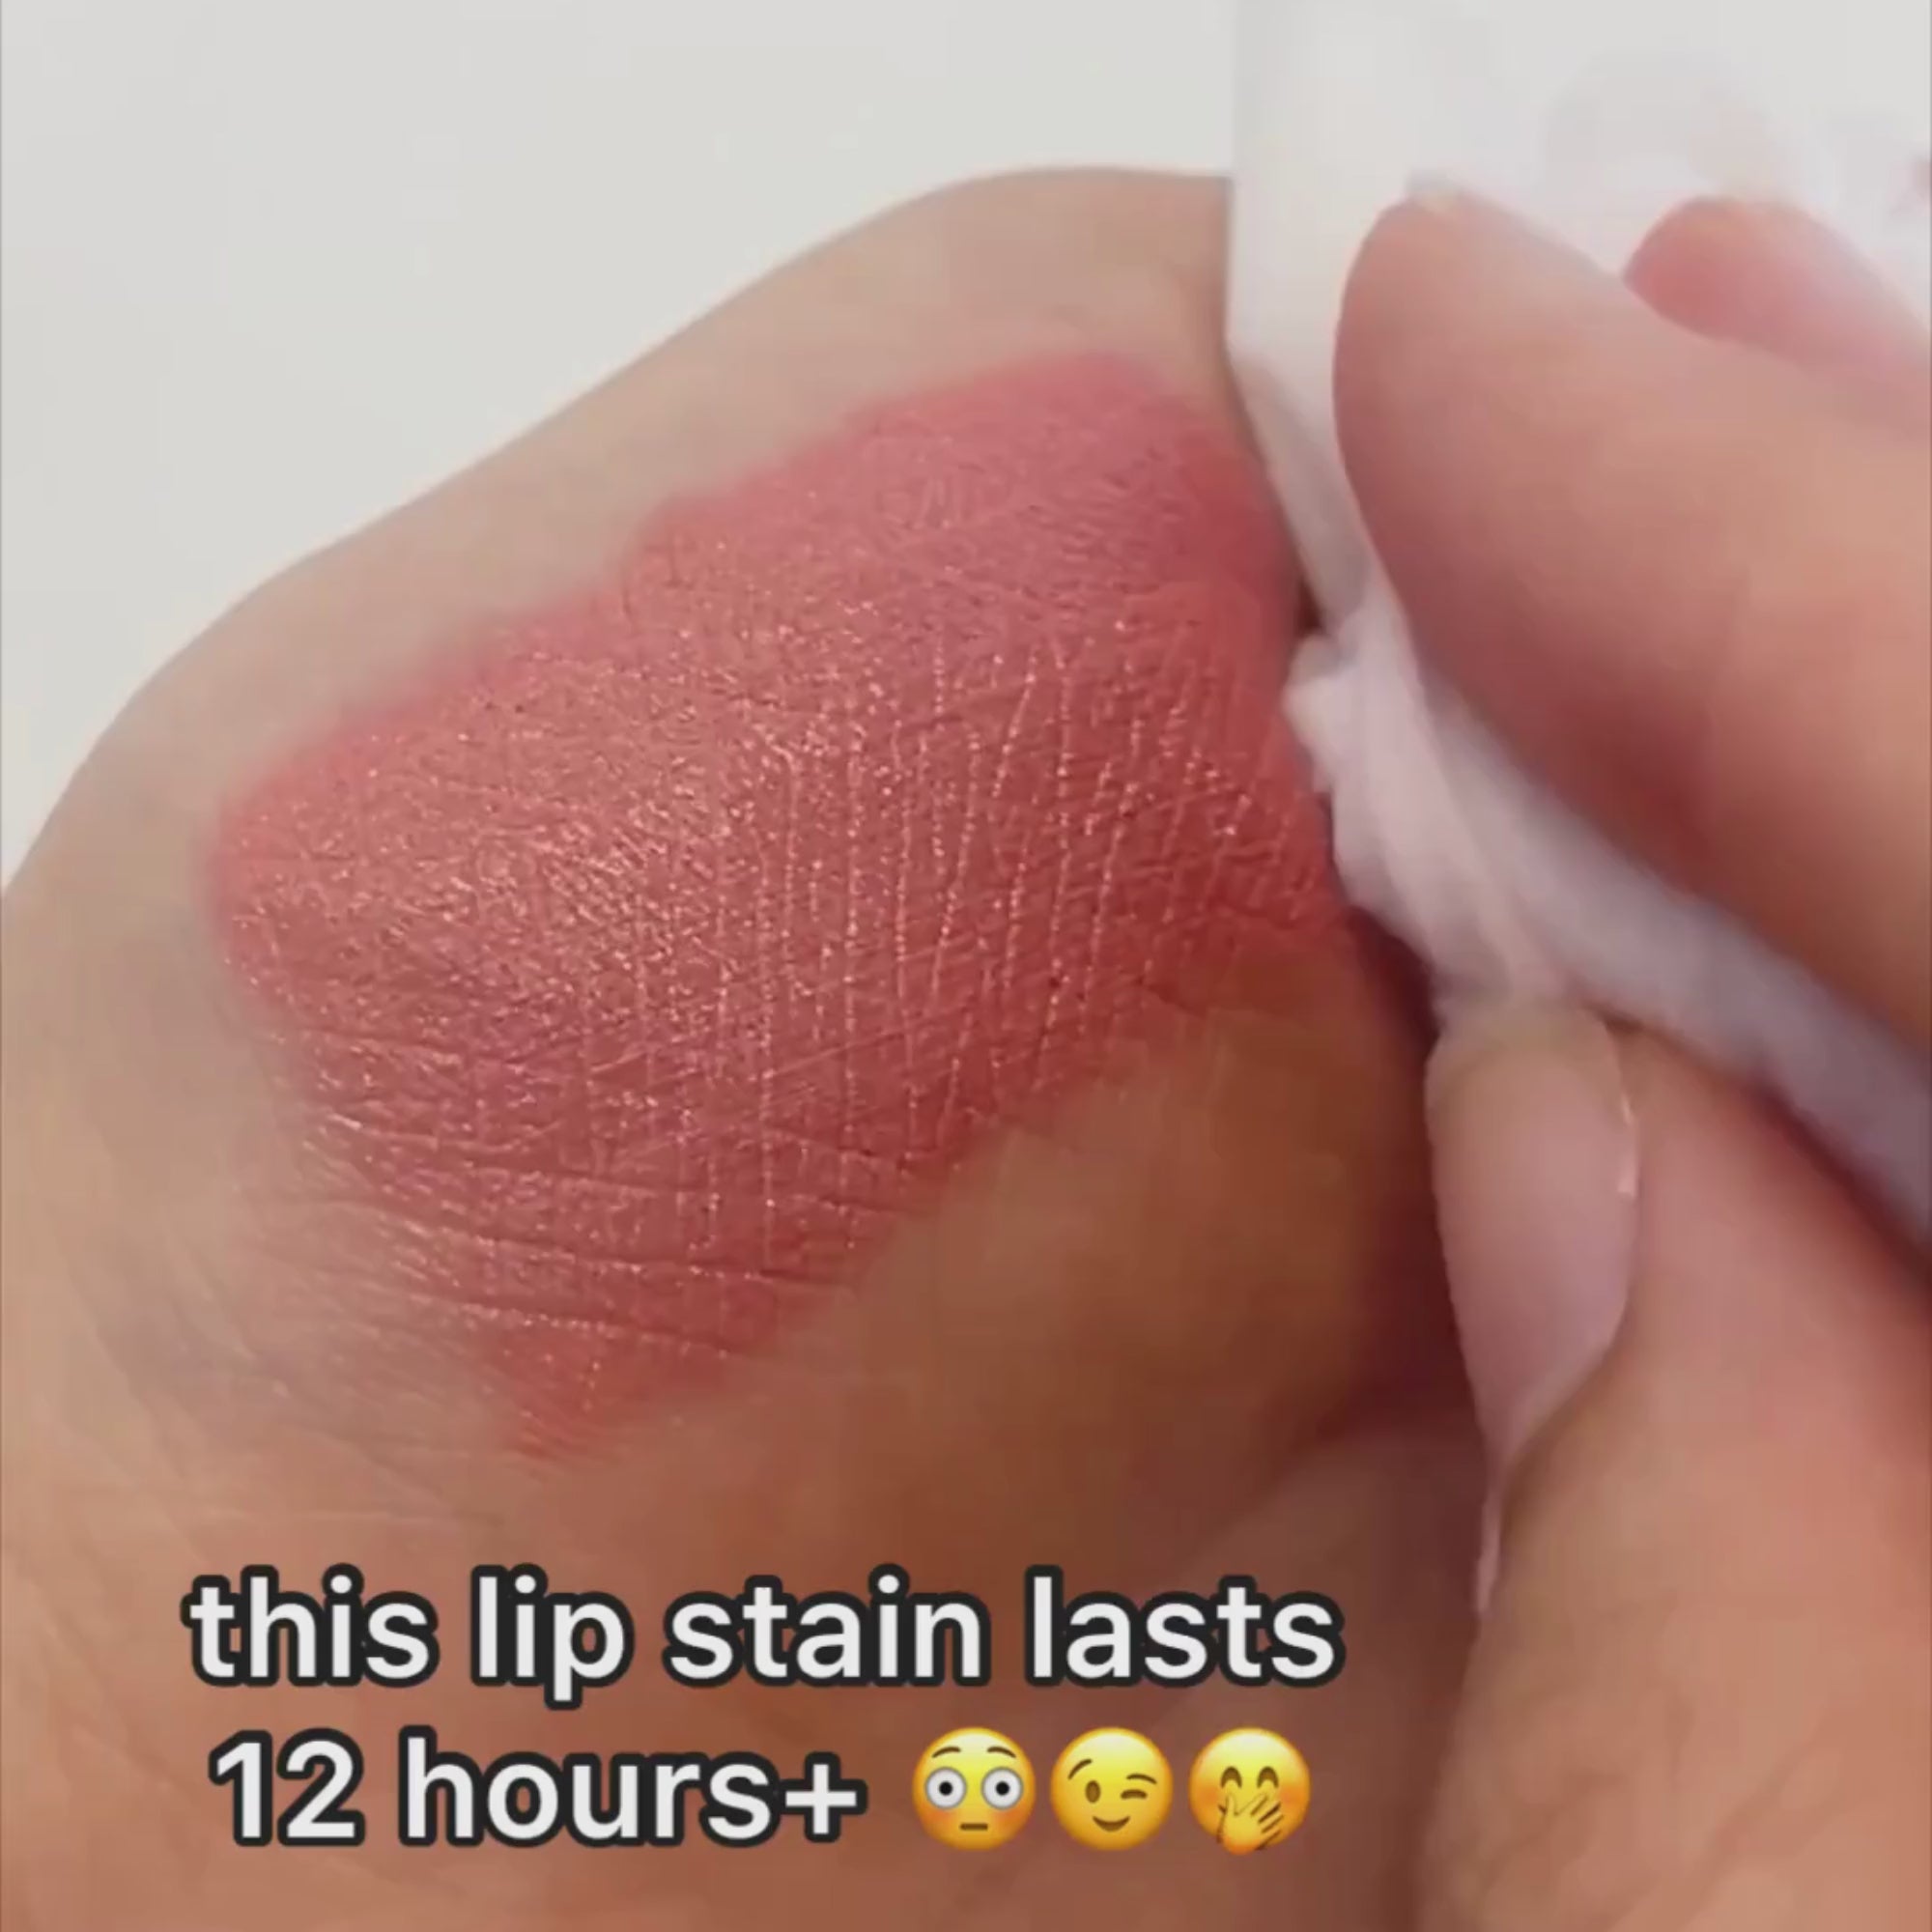 These lip stains last for 12+ hours!